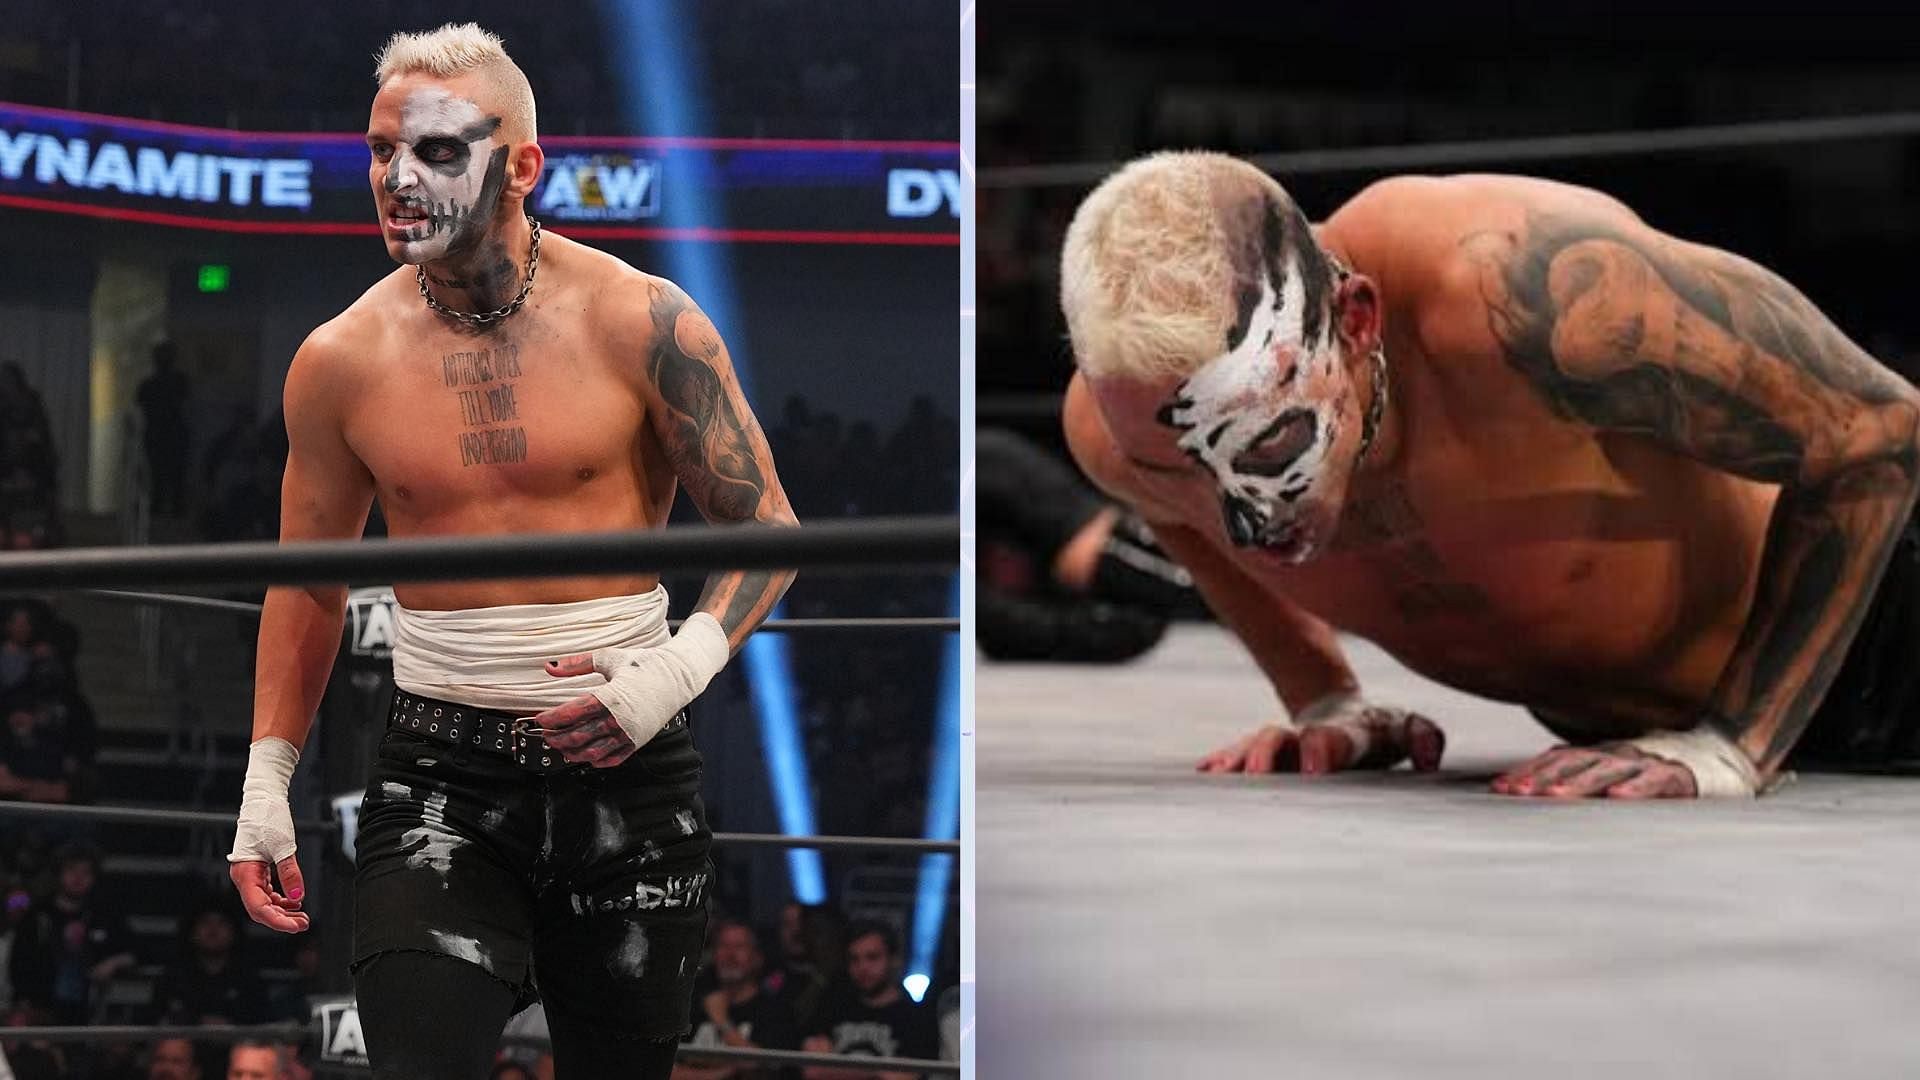 Darby Allin is a former TNT Champion